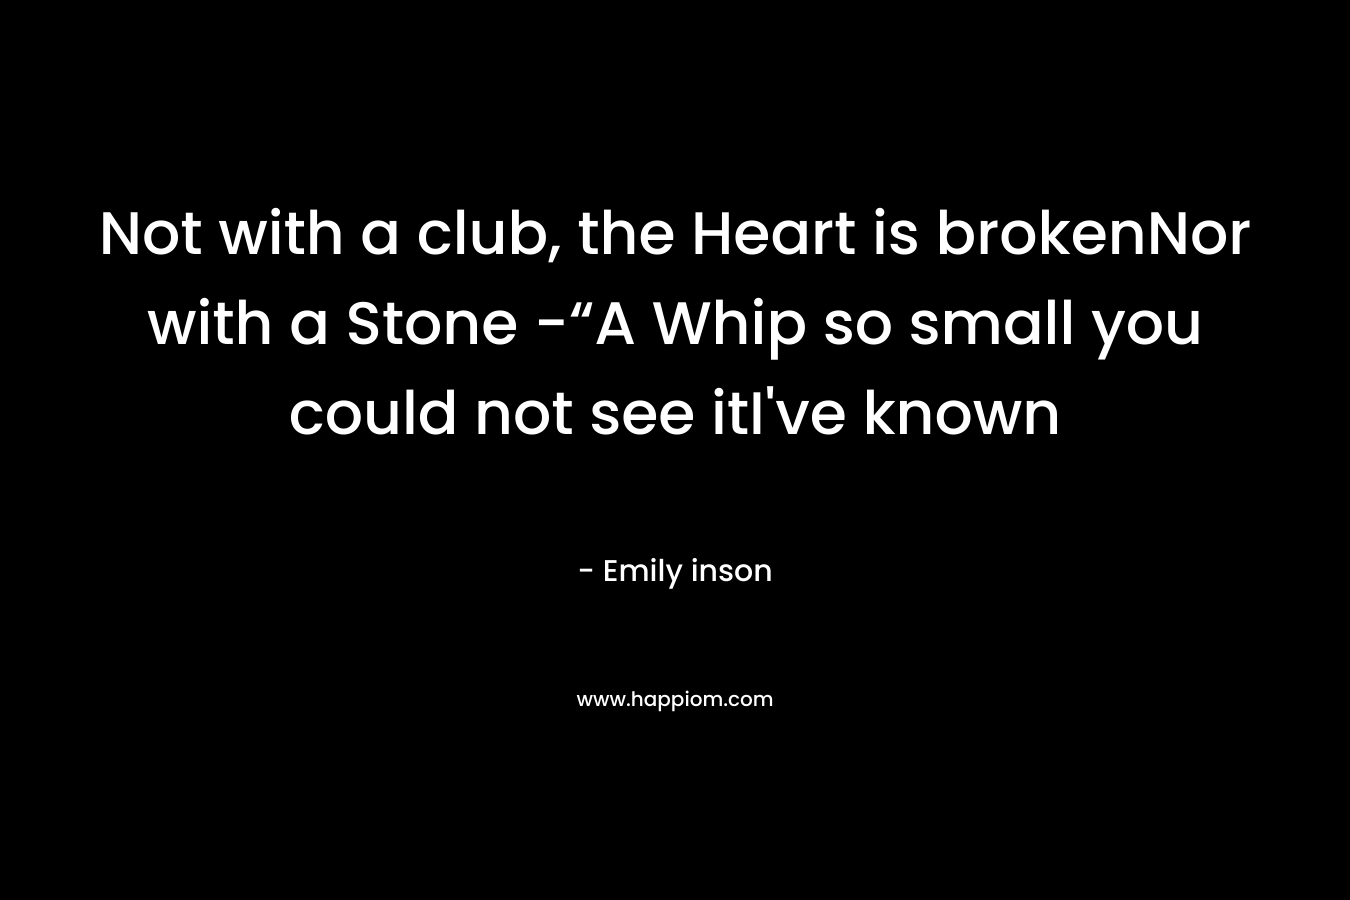 Not with a club, the Heart is brokenNor with a Stone -“A Whip so small you could not see itI've known